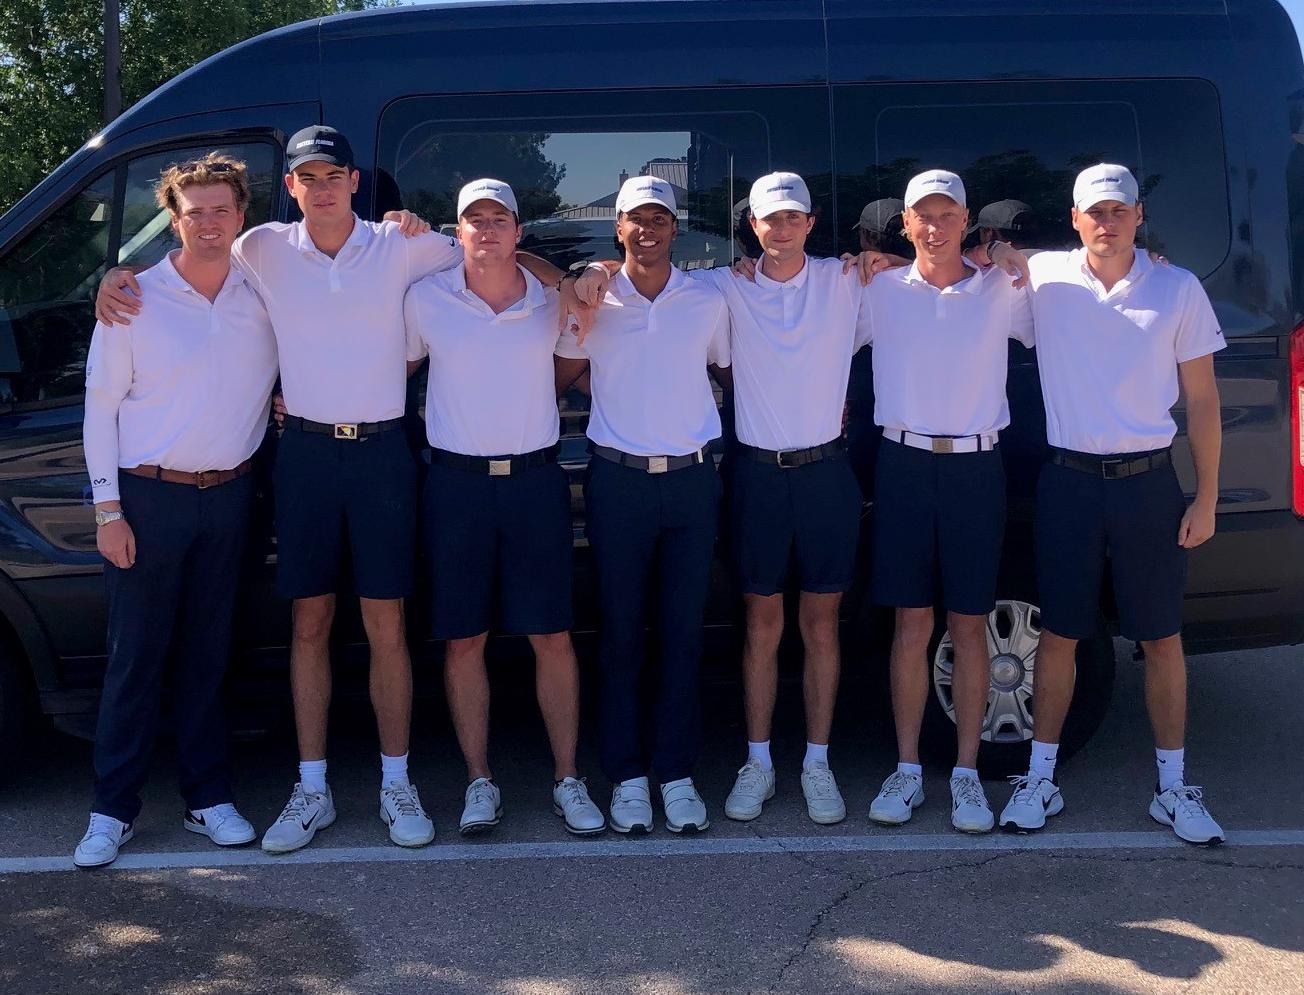 Men's golf team tied for 10th after first round at national tournament